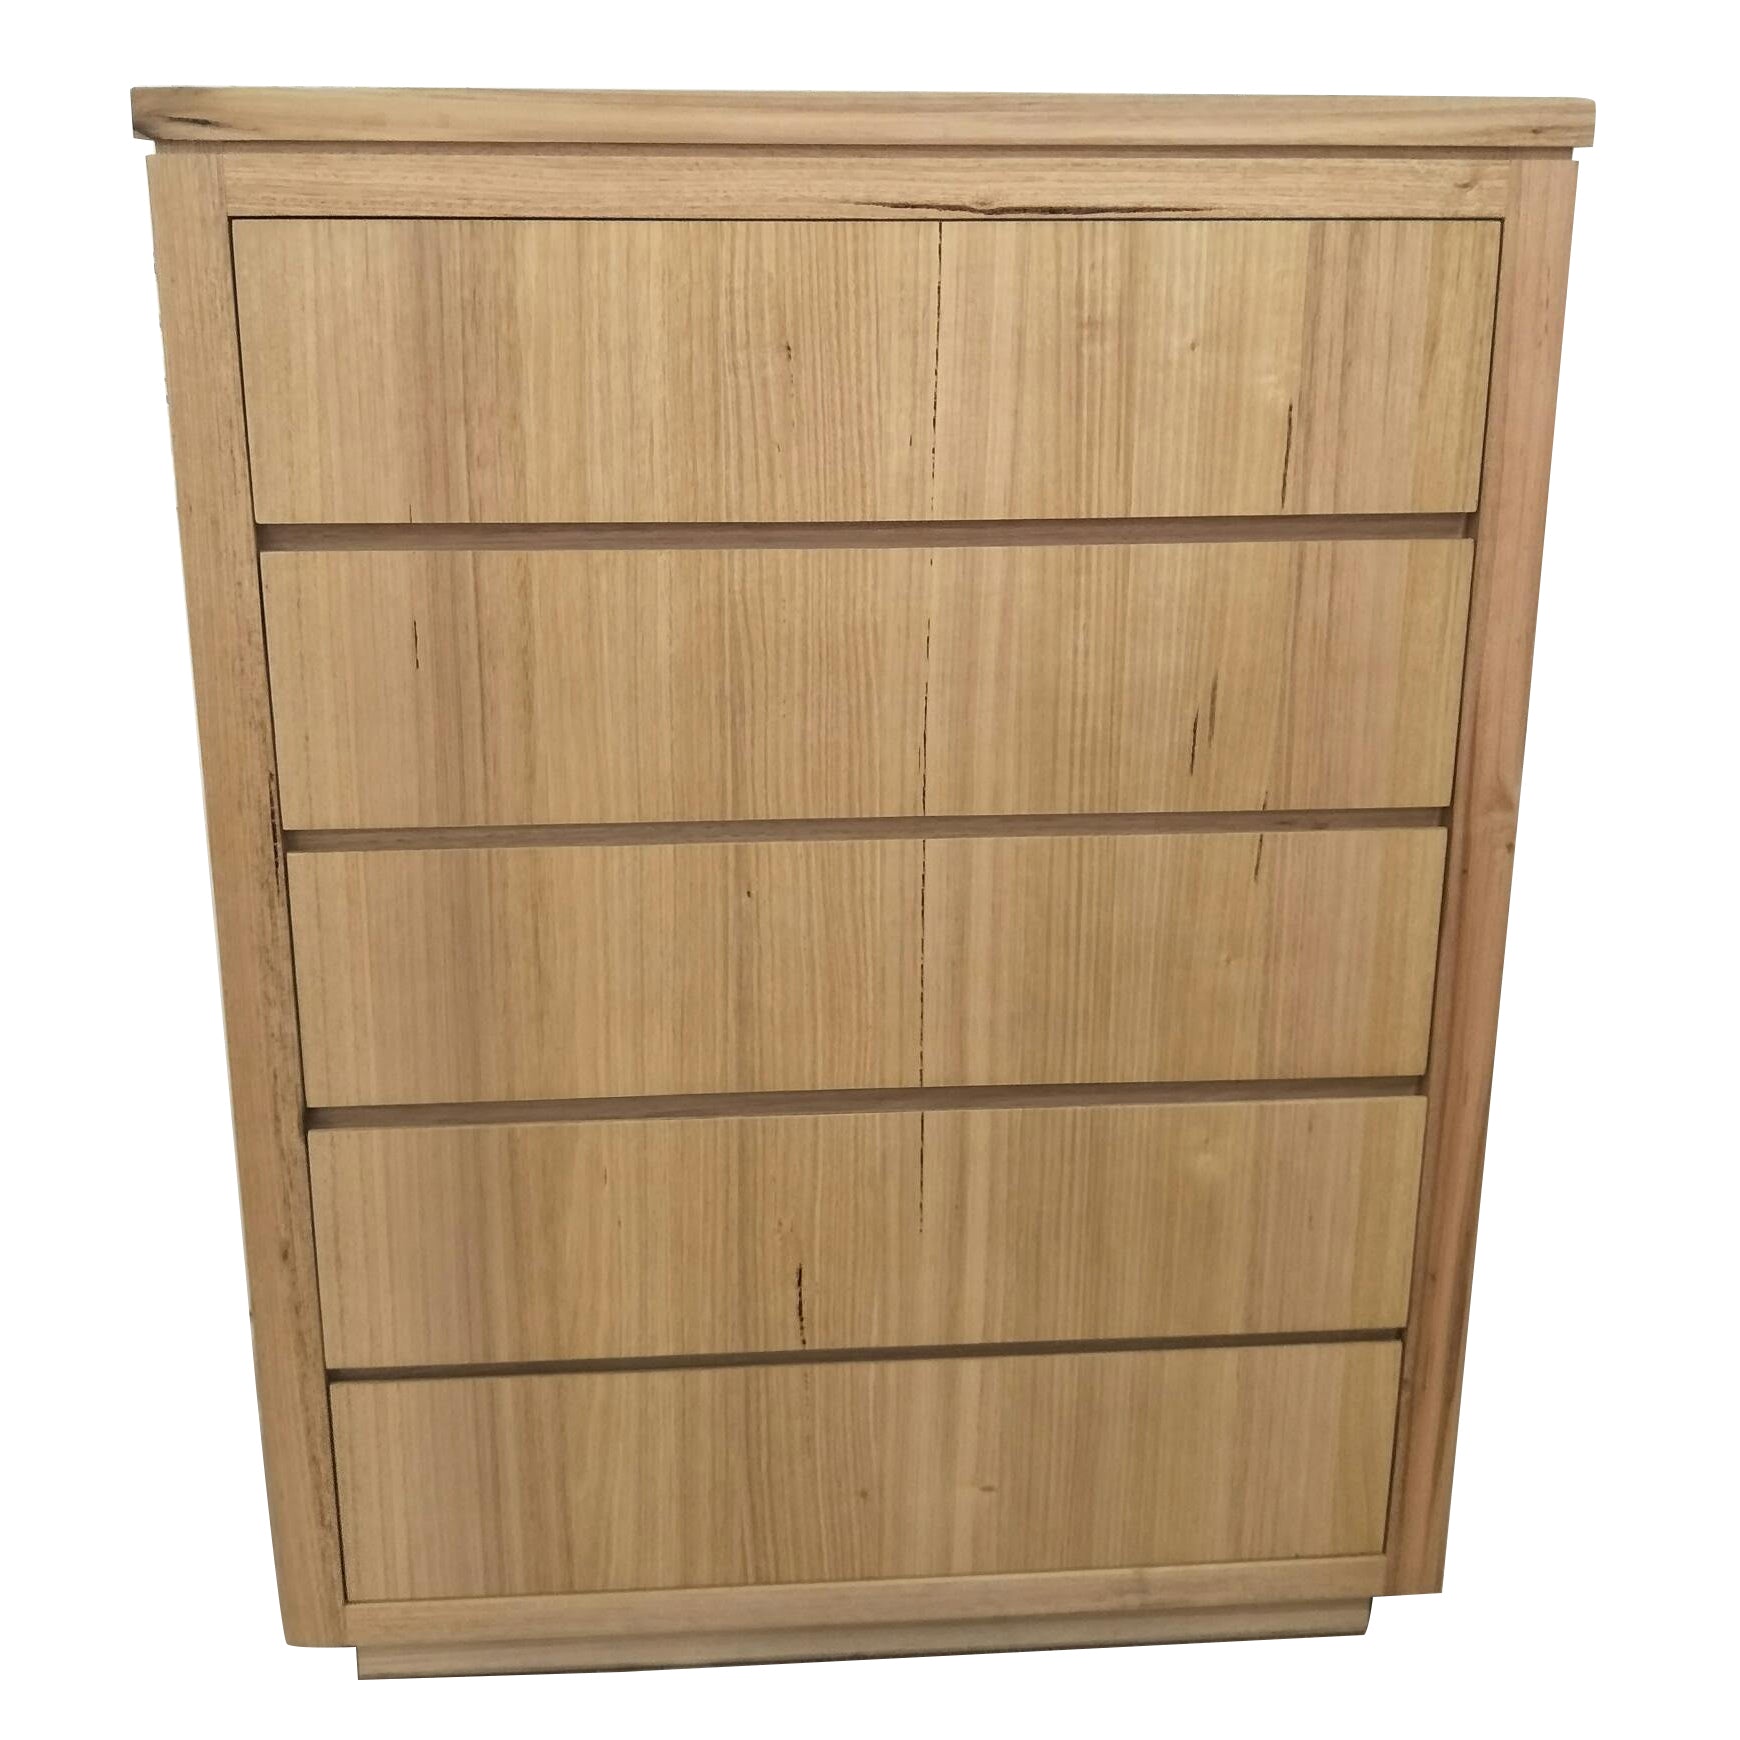 No Assembly Required! Rosemallow Tallboy With Five Drawers Solid Messmate Wood